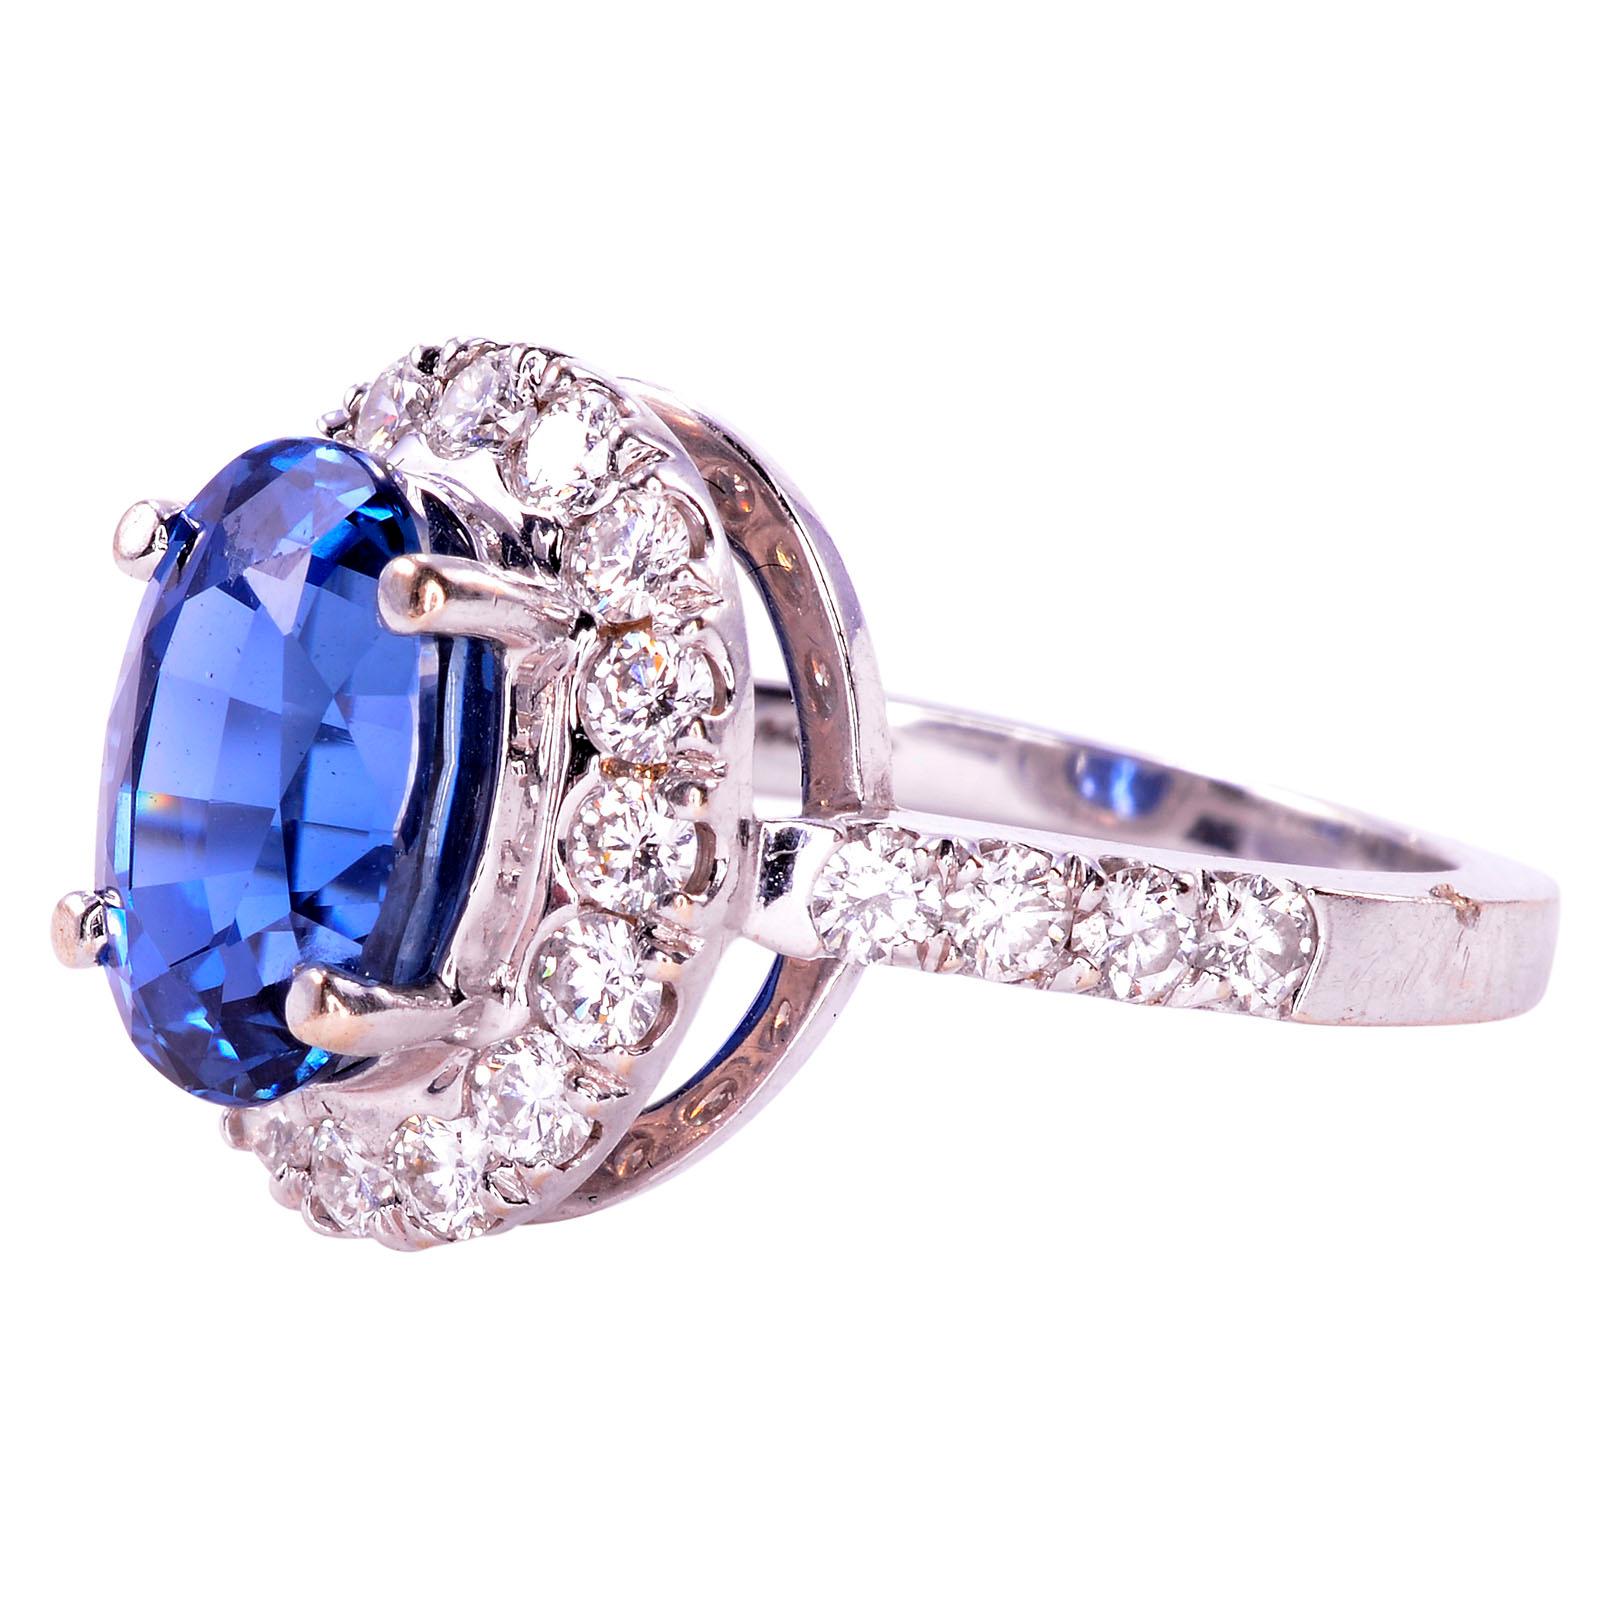 Estate 4.40 carat GIA certified natural untreated sapphire and diamond ring. This 18 karat white gold ring has one GIA certified natural (non heat treated) sapphire at 4.40 carats. This estate sapphire ring is accented with 24 round brilliant